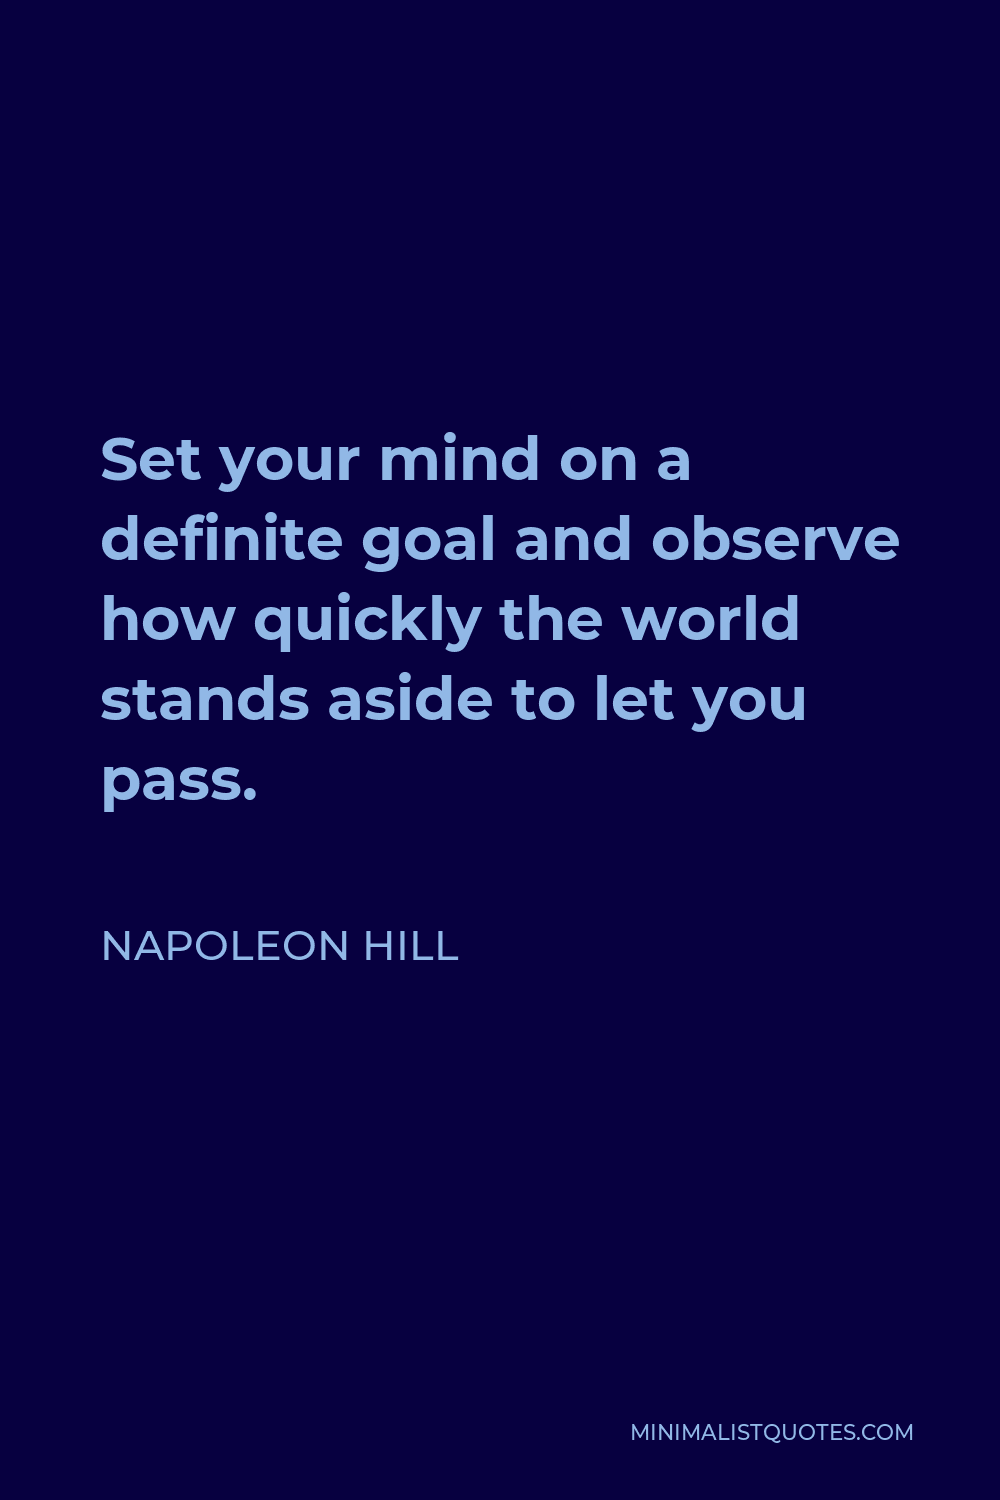 Napoleon Hill Quote - Set your mind on a definite goal and observe how quickly the world stands aside to let you pass.